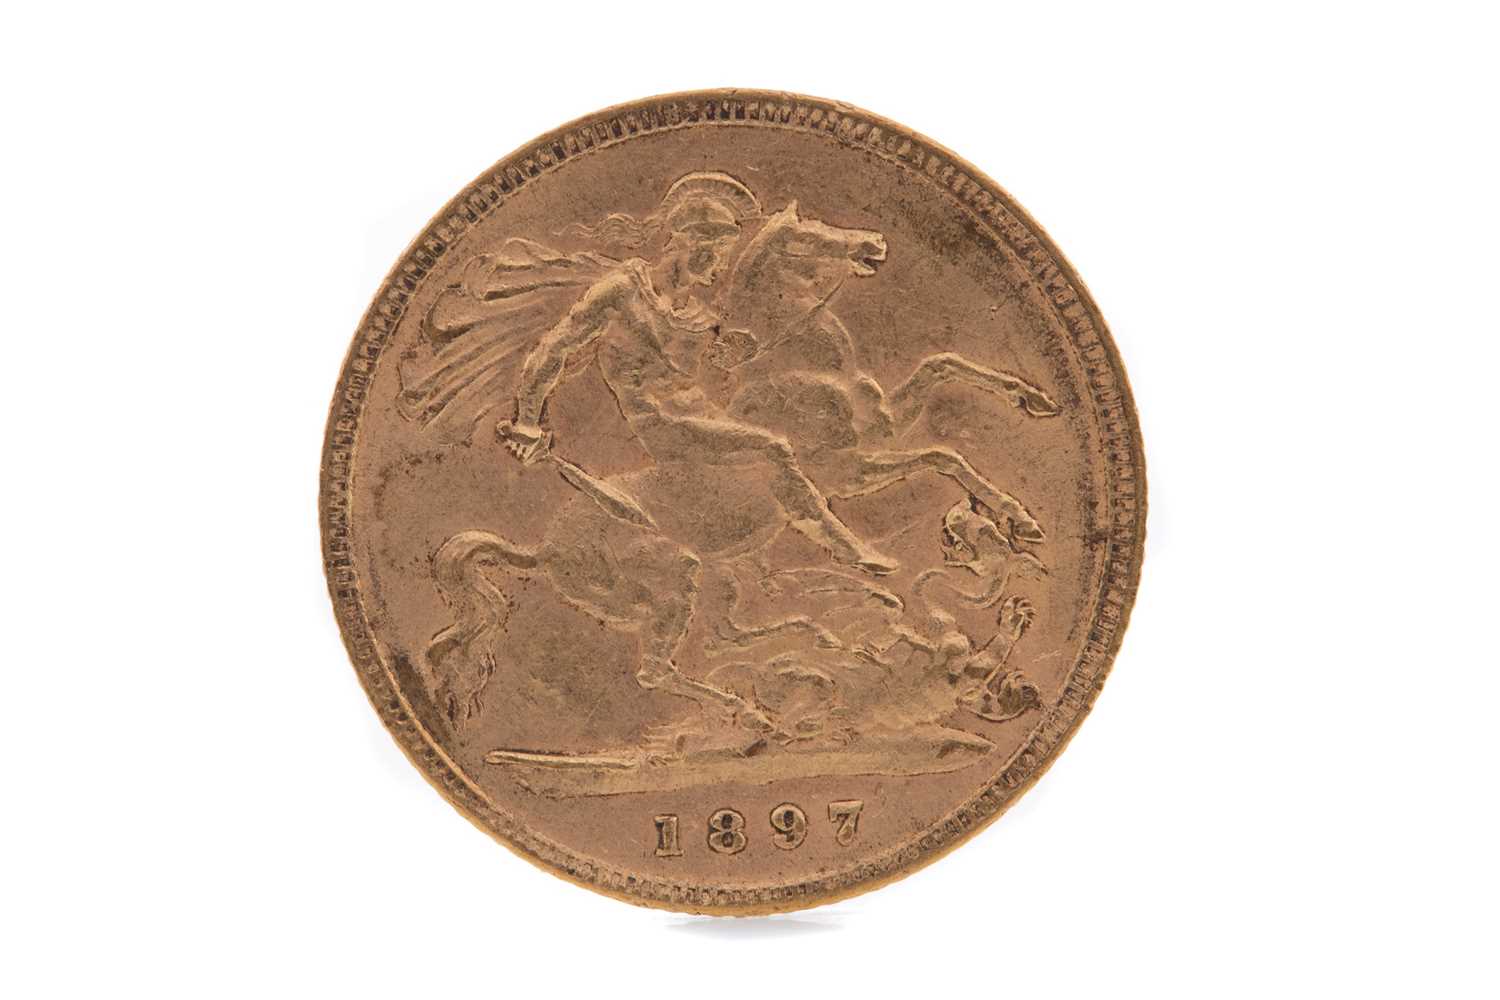 Lot 6 - A VICTORIA GOLD HALF SOVEREIGN DATED 1897